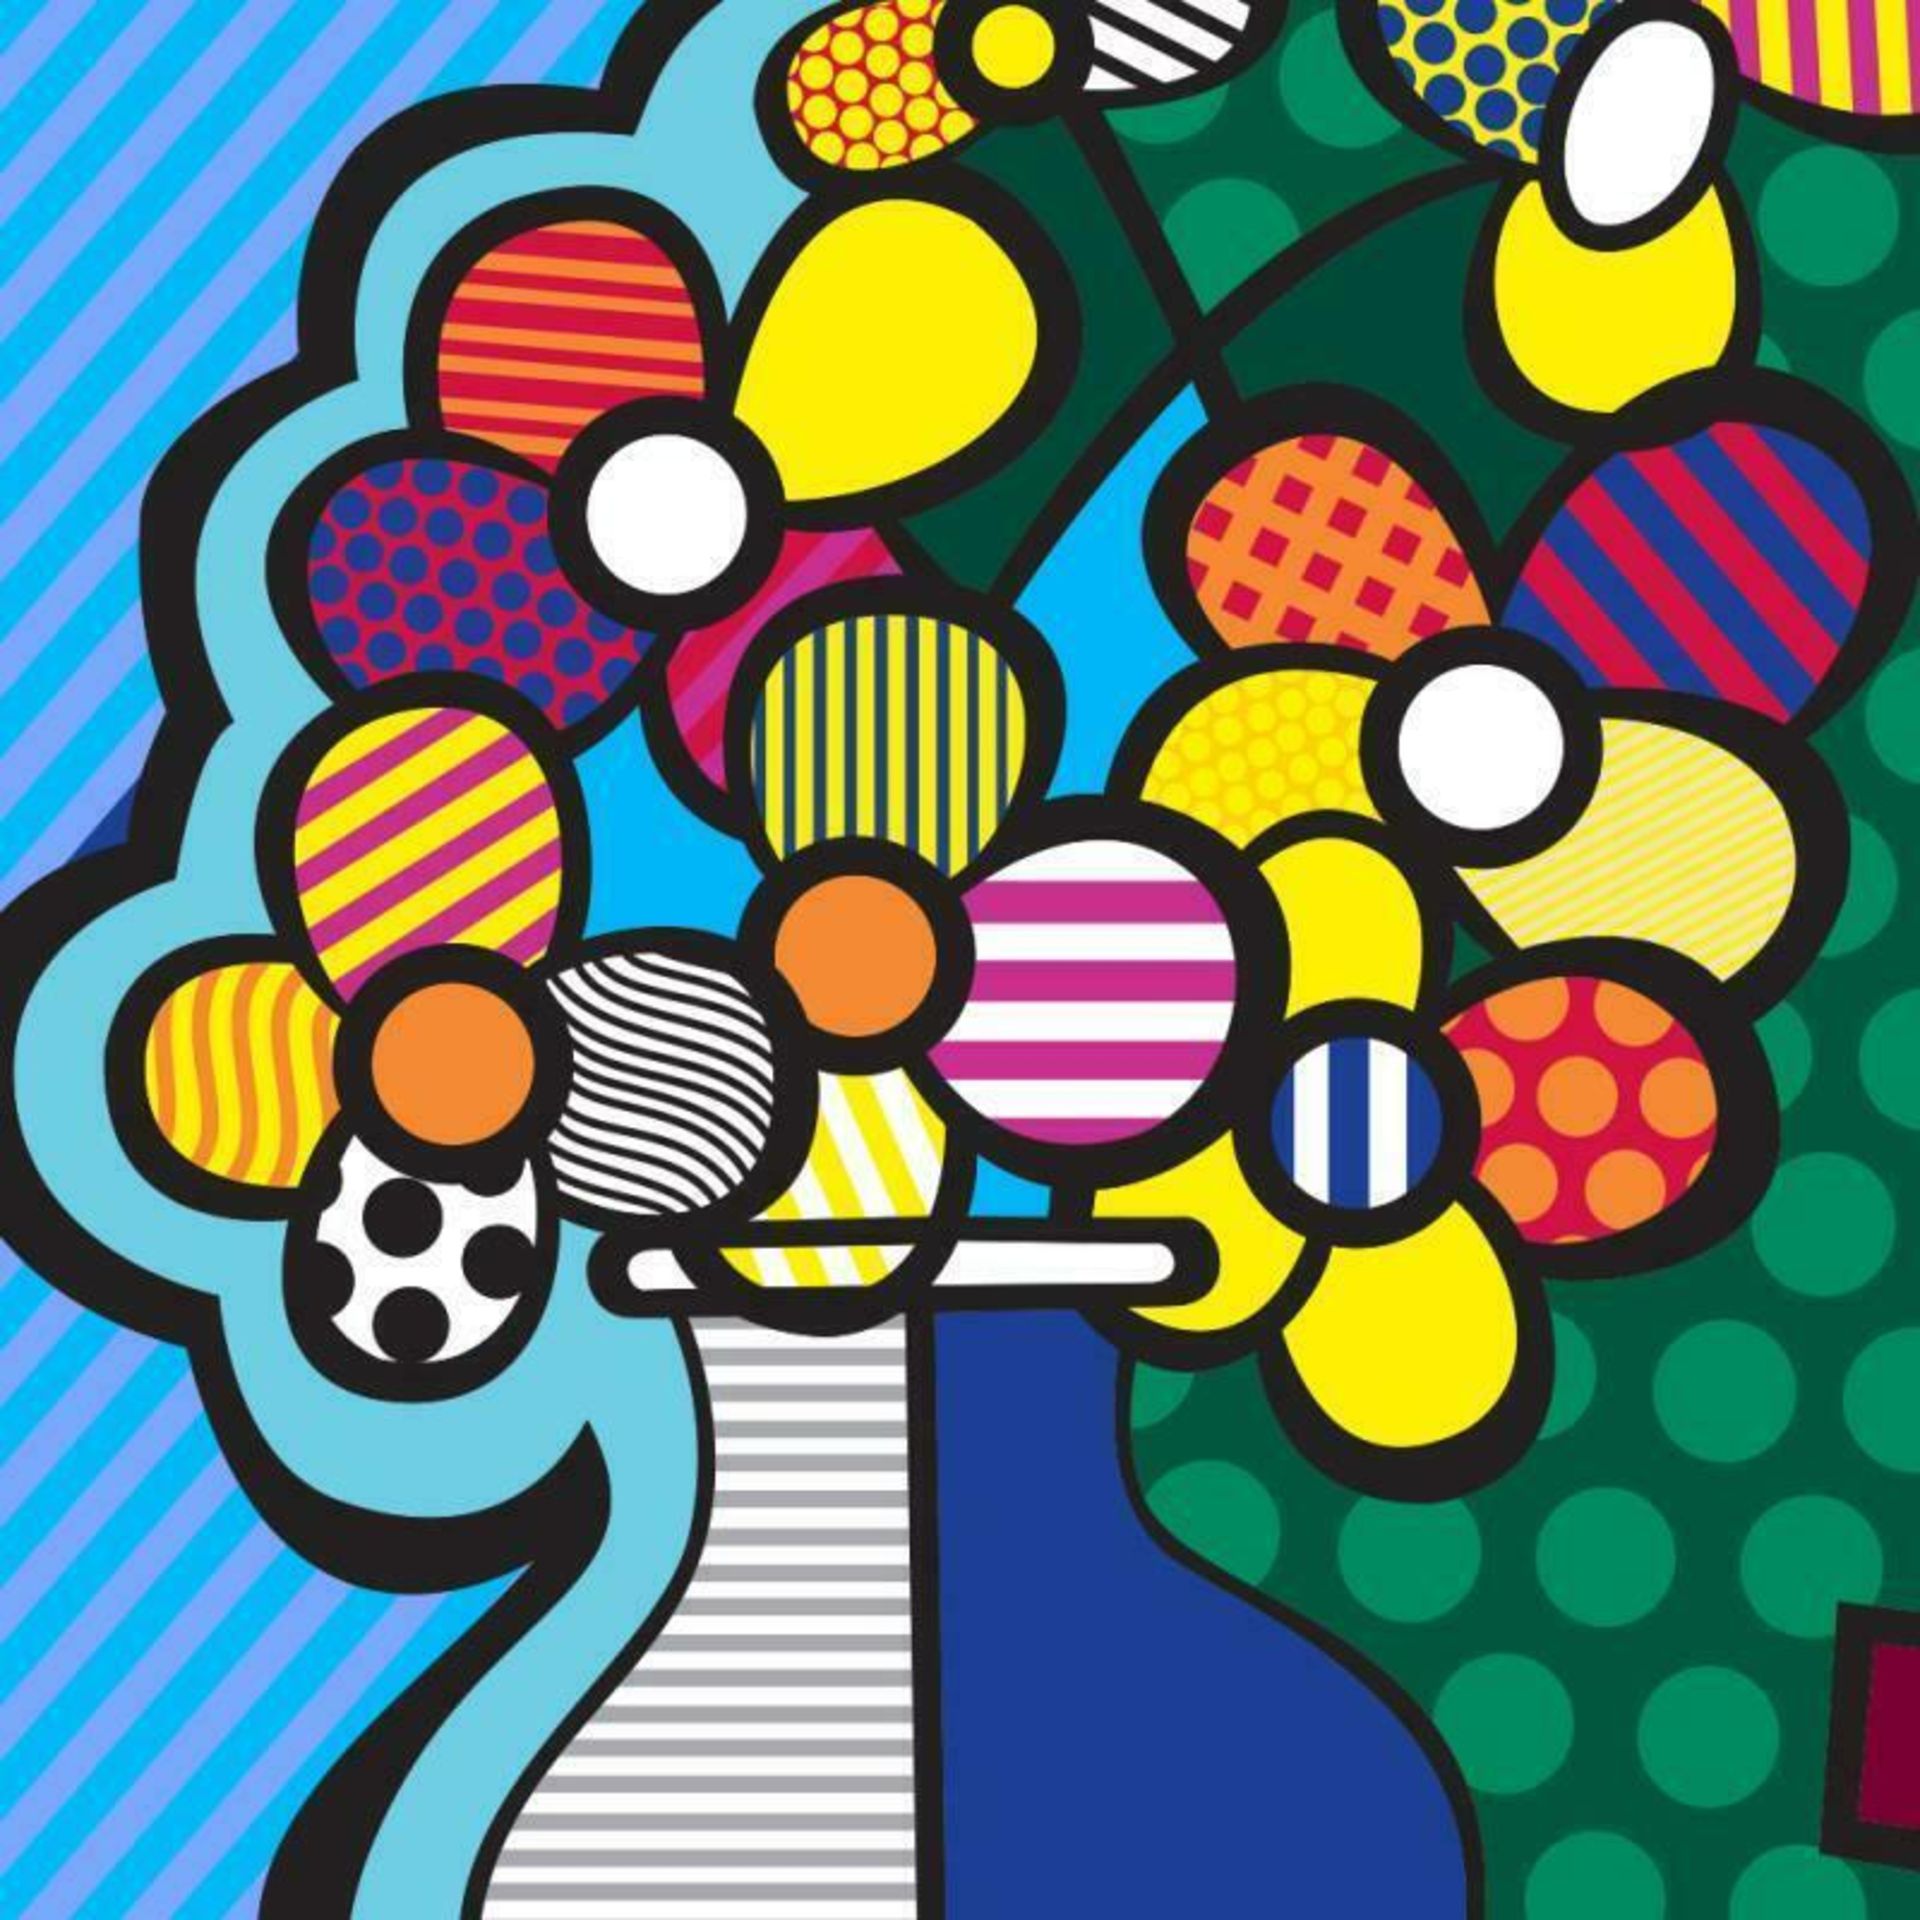 Romero Britto "New Flower" Hand Signed Giclee on Canvas; Authenticated - Image 2 of 2